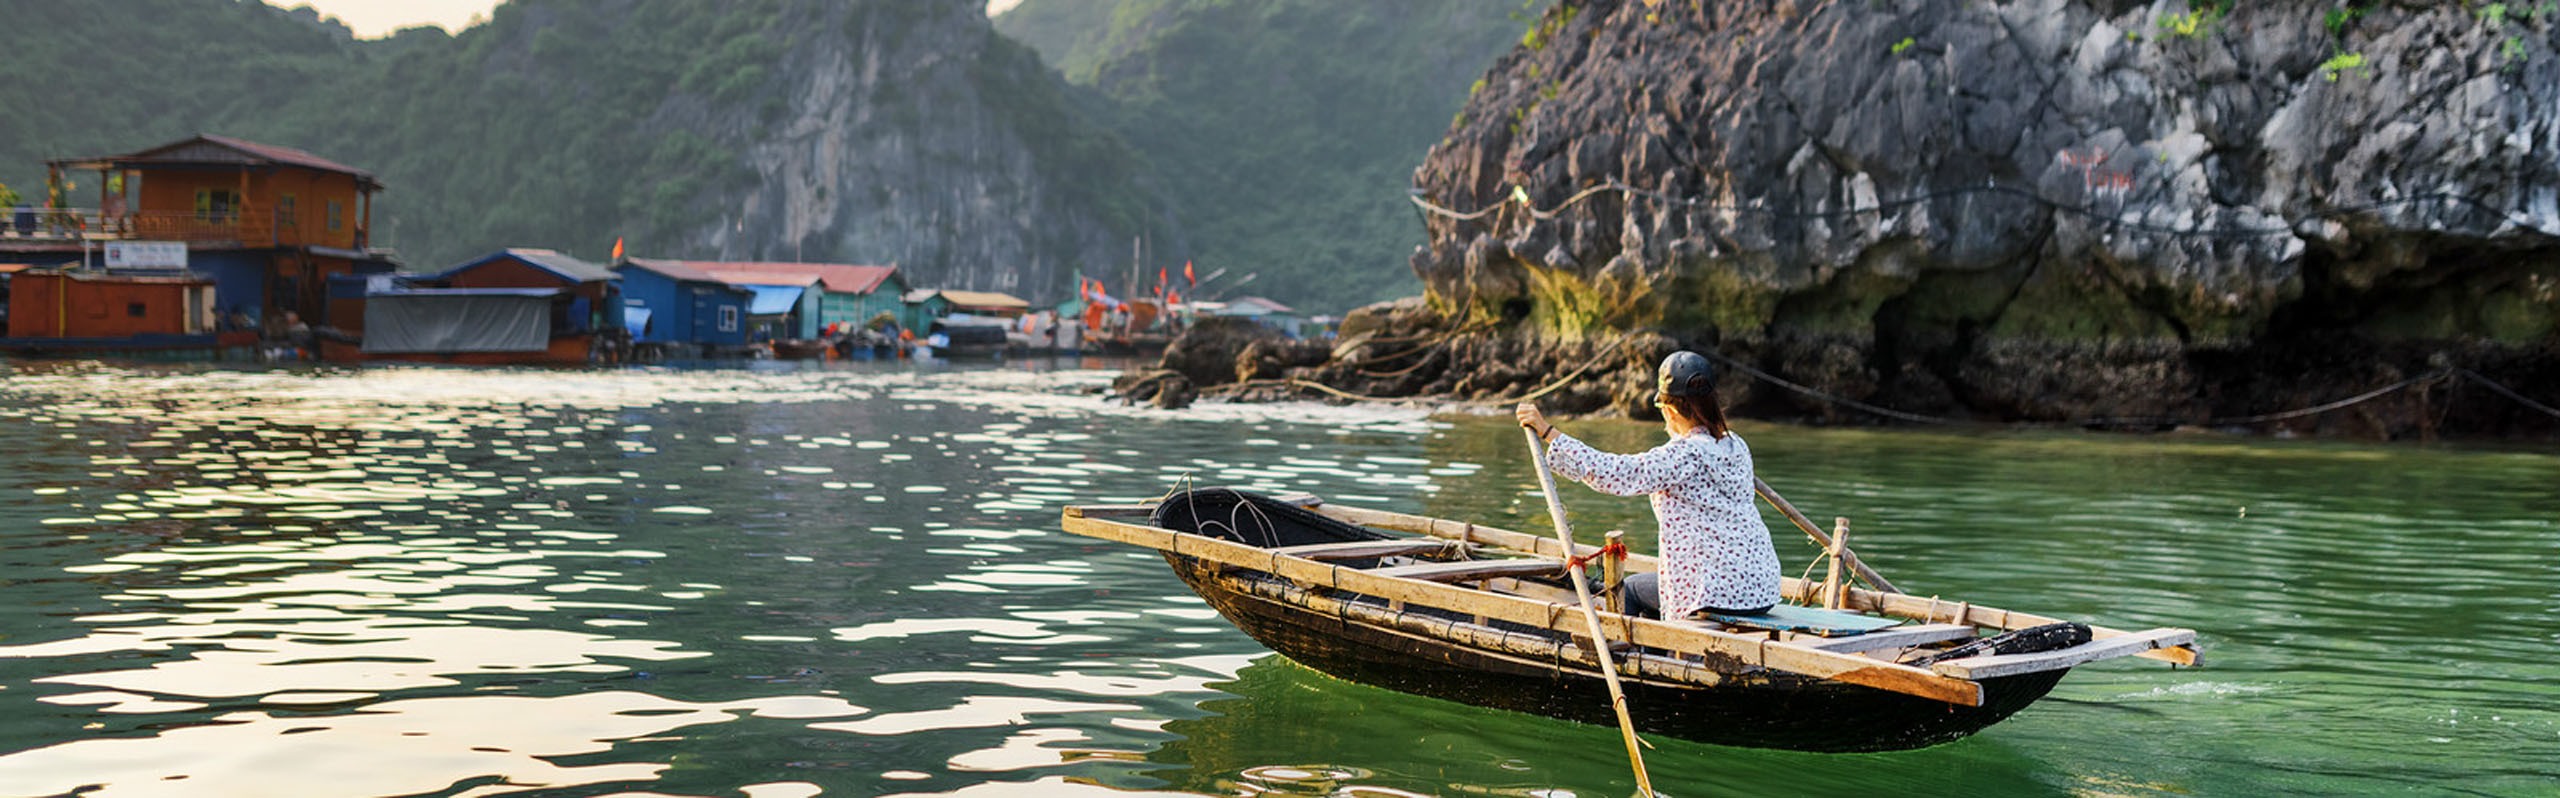 Best Times to Visit Halong Bay for Great Weather, Fewer Crowds & Cheaper Prices